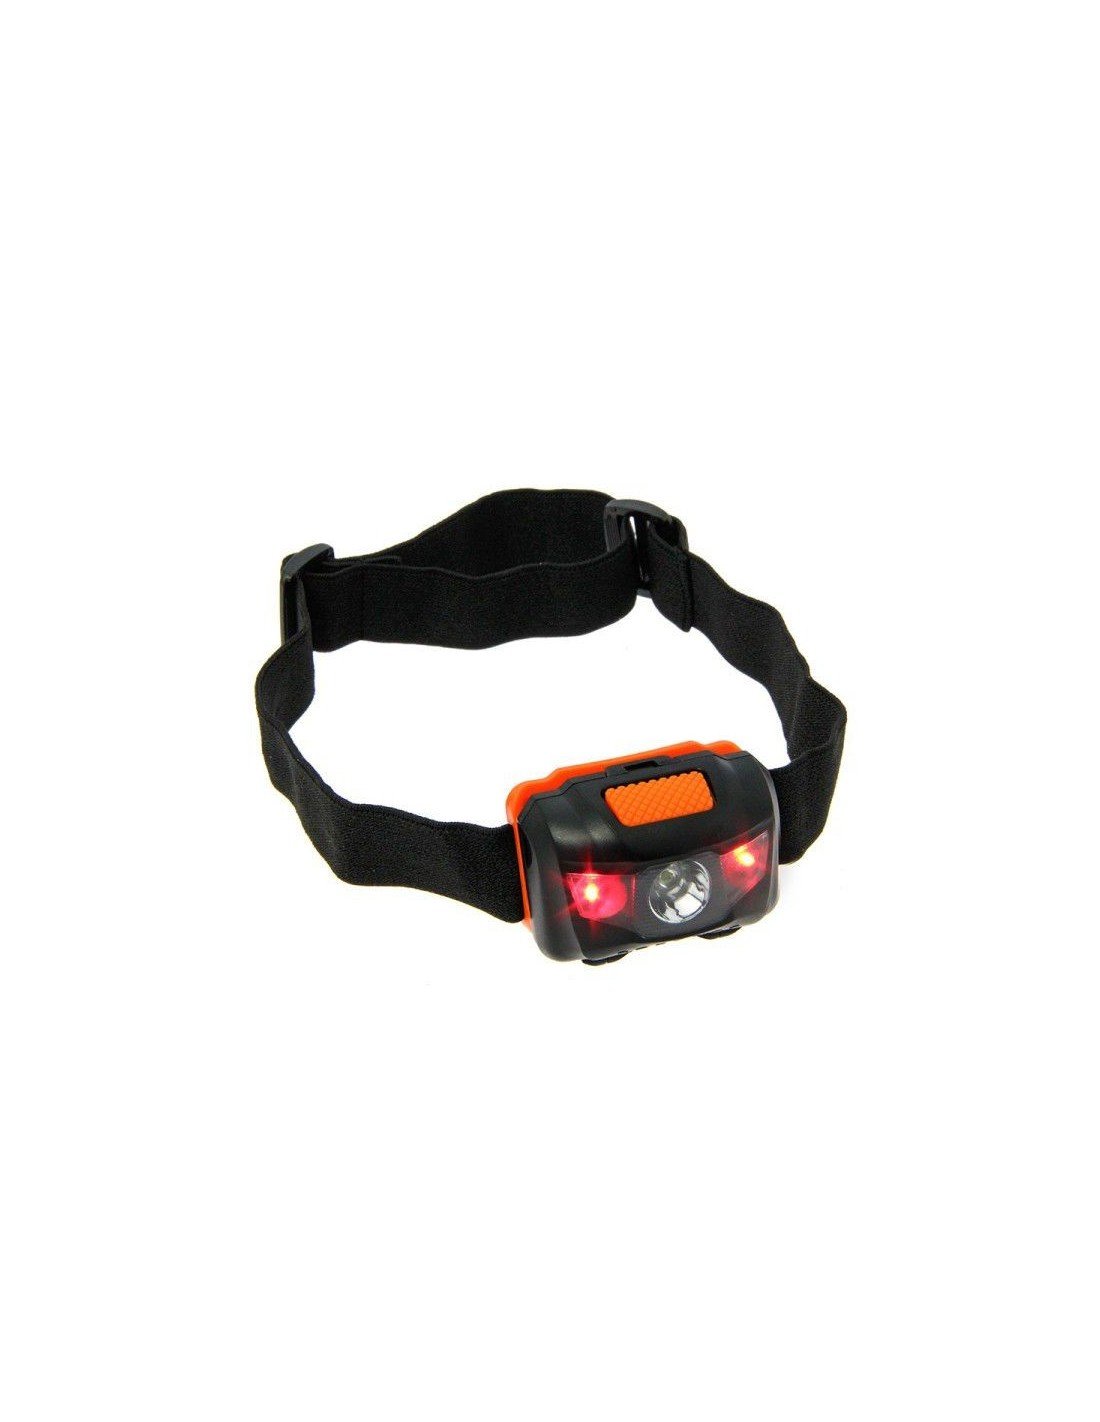 NGT LED Headlight with White and Red Light (100 lumens) челник